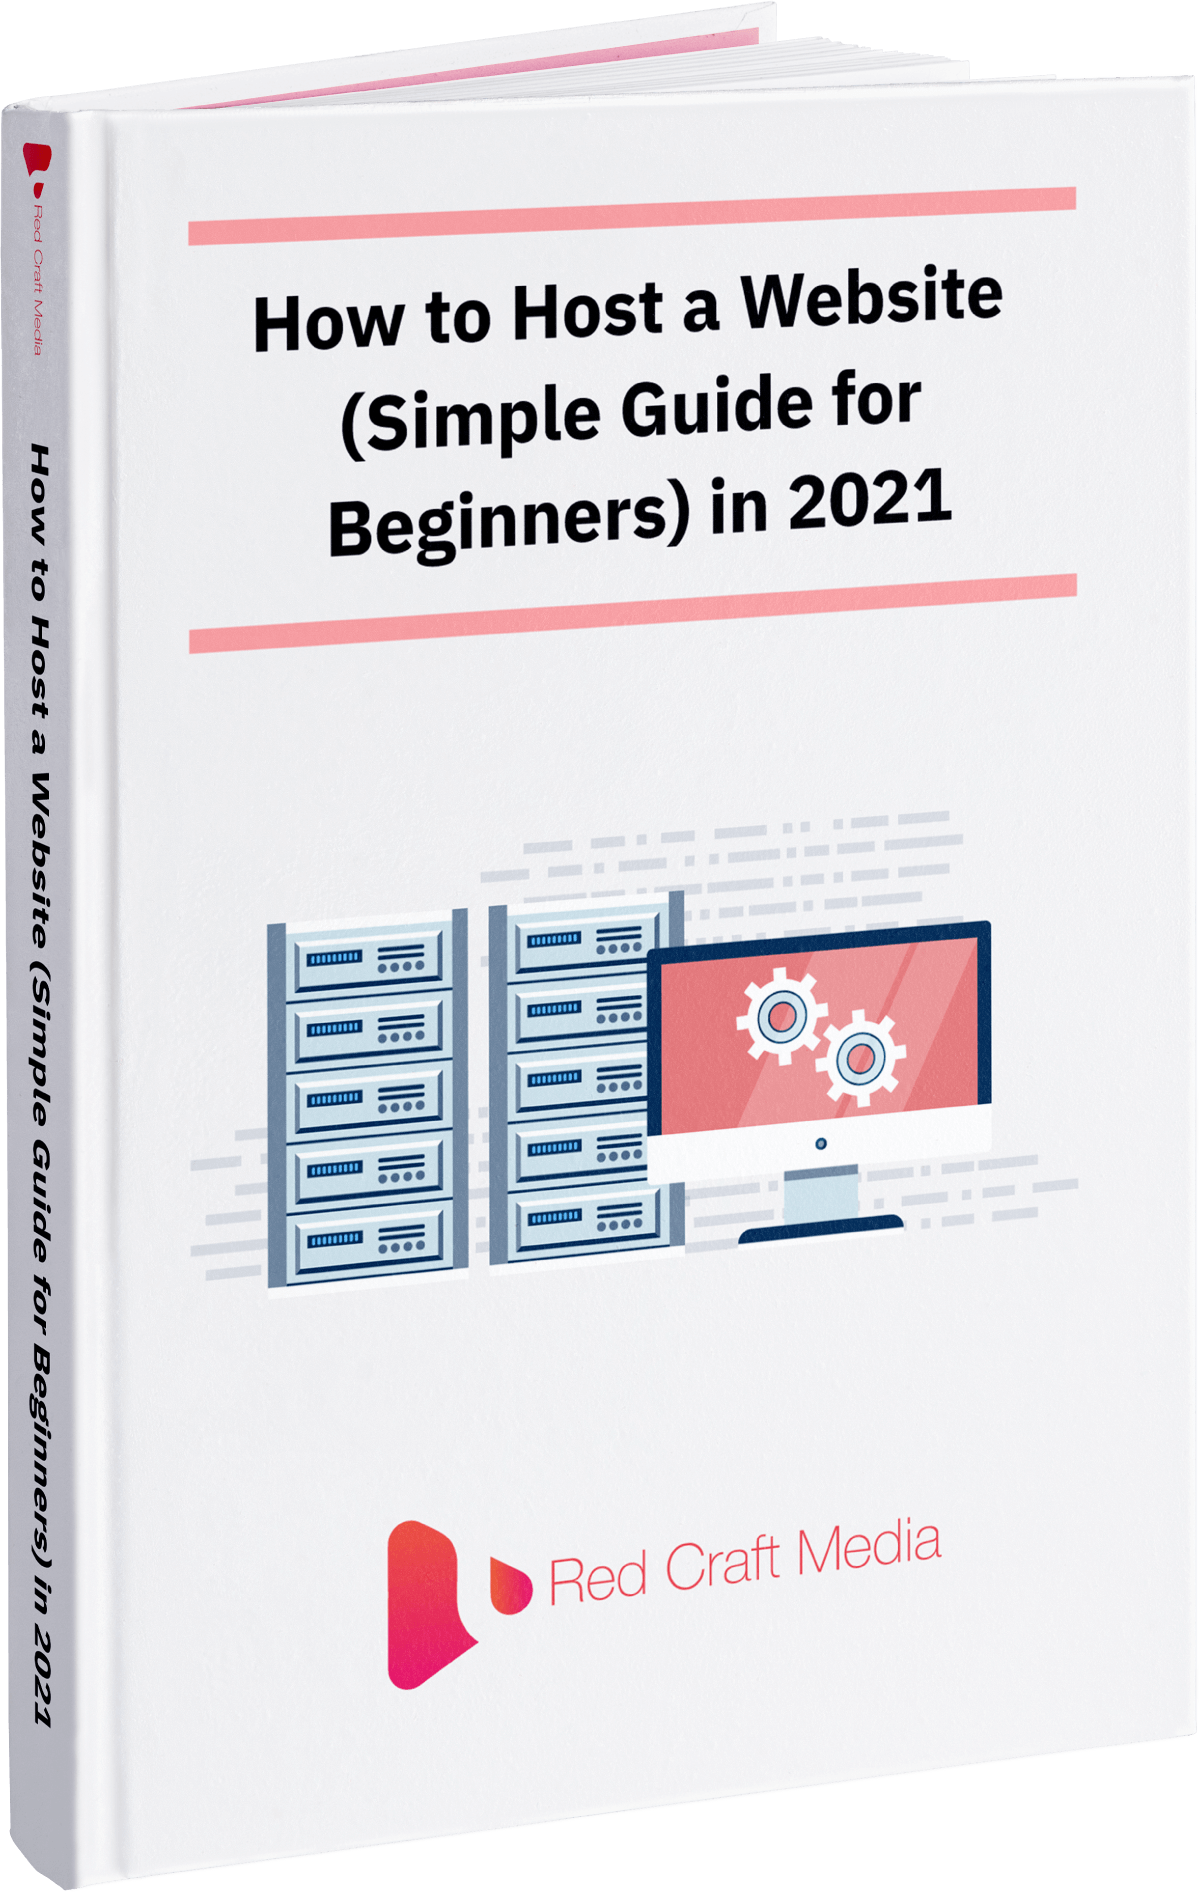 How to Host a Website (Simple Guide for Beginners) in 2021